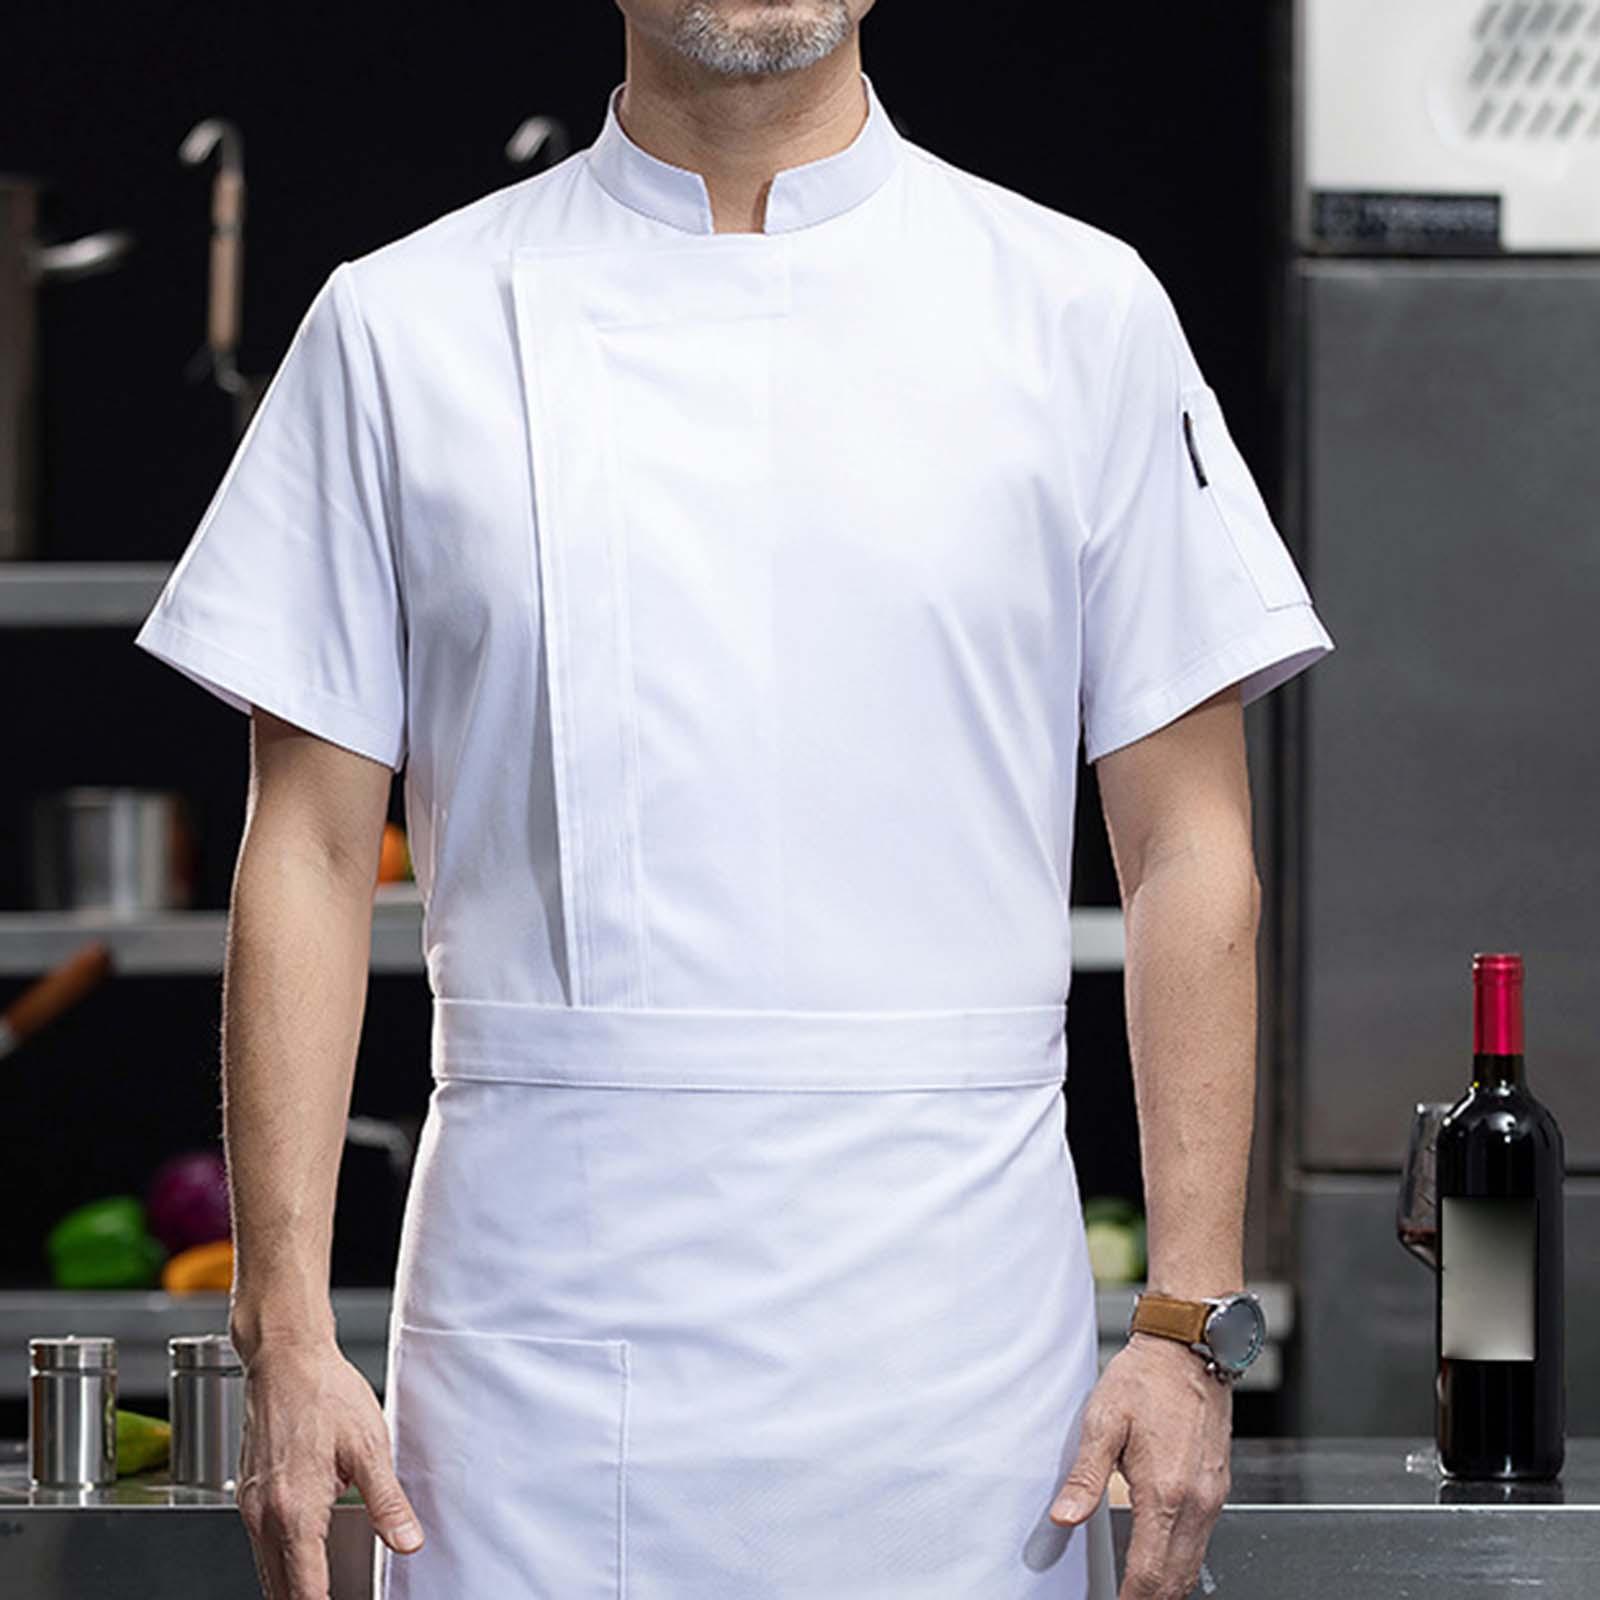 Chef Coat Jacket Breathable Waiter Waitress Apparel Executive Short Length Sleeve Chef Clothes for Bakery Food Service Hotel Catering